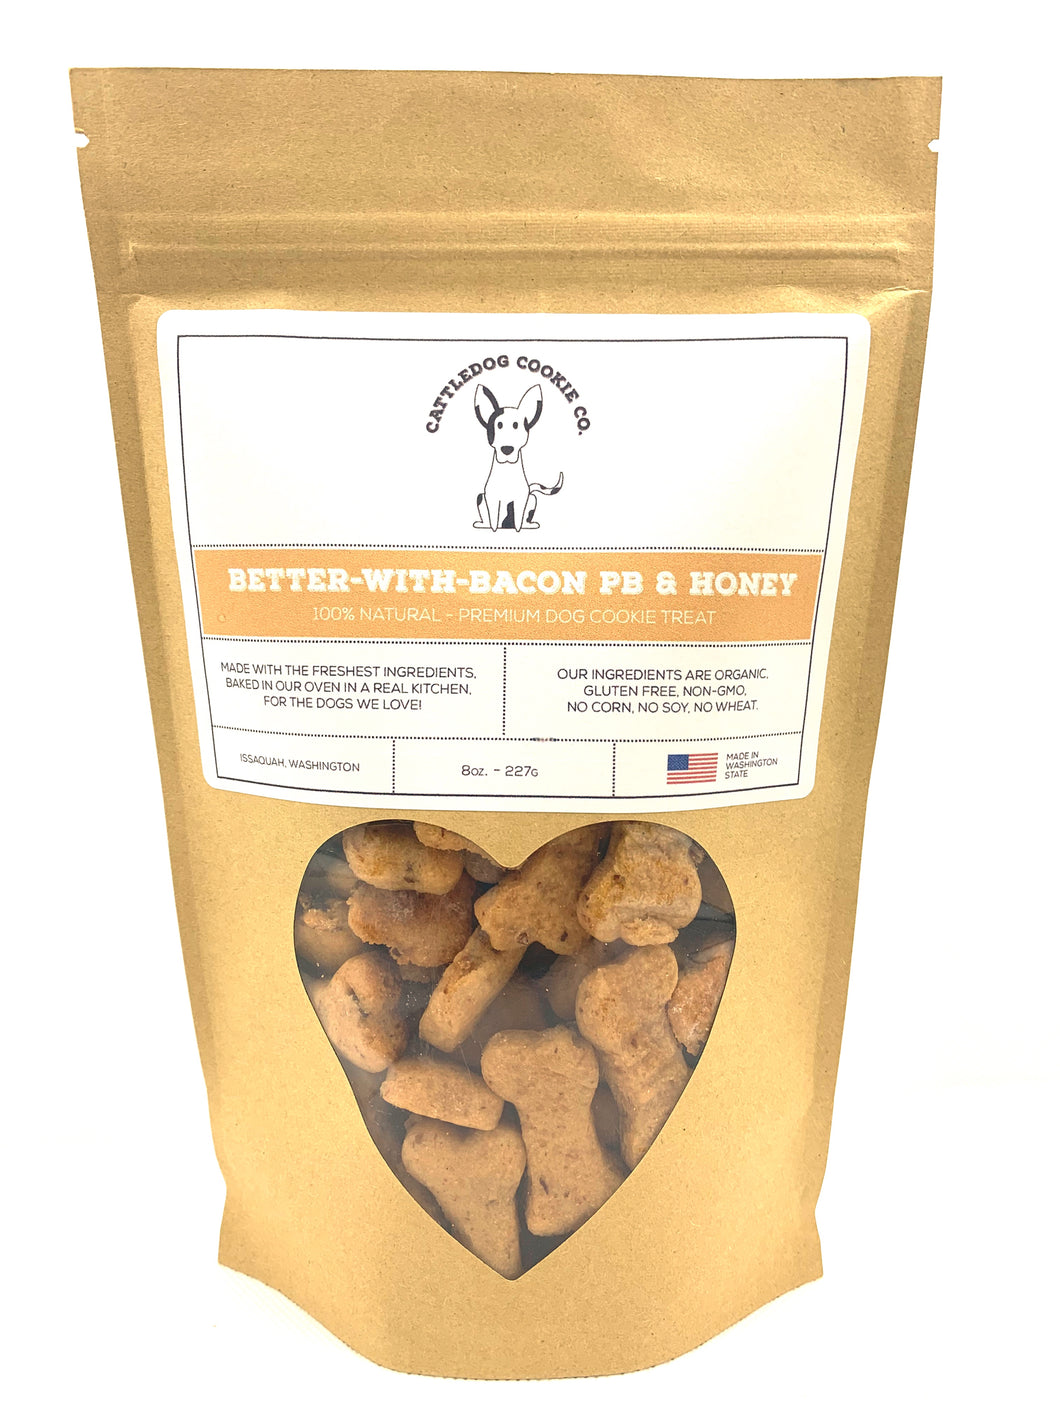 Better-with-bacon PB & Honey 8oz. - Cattledog Cookie Co.